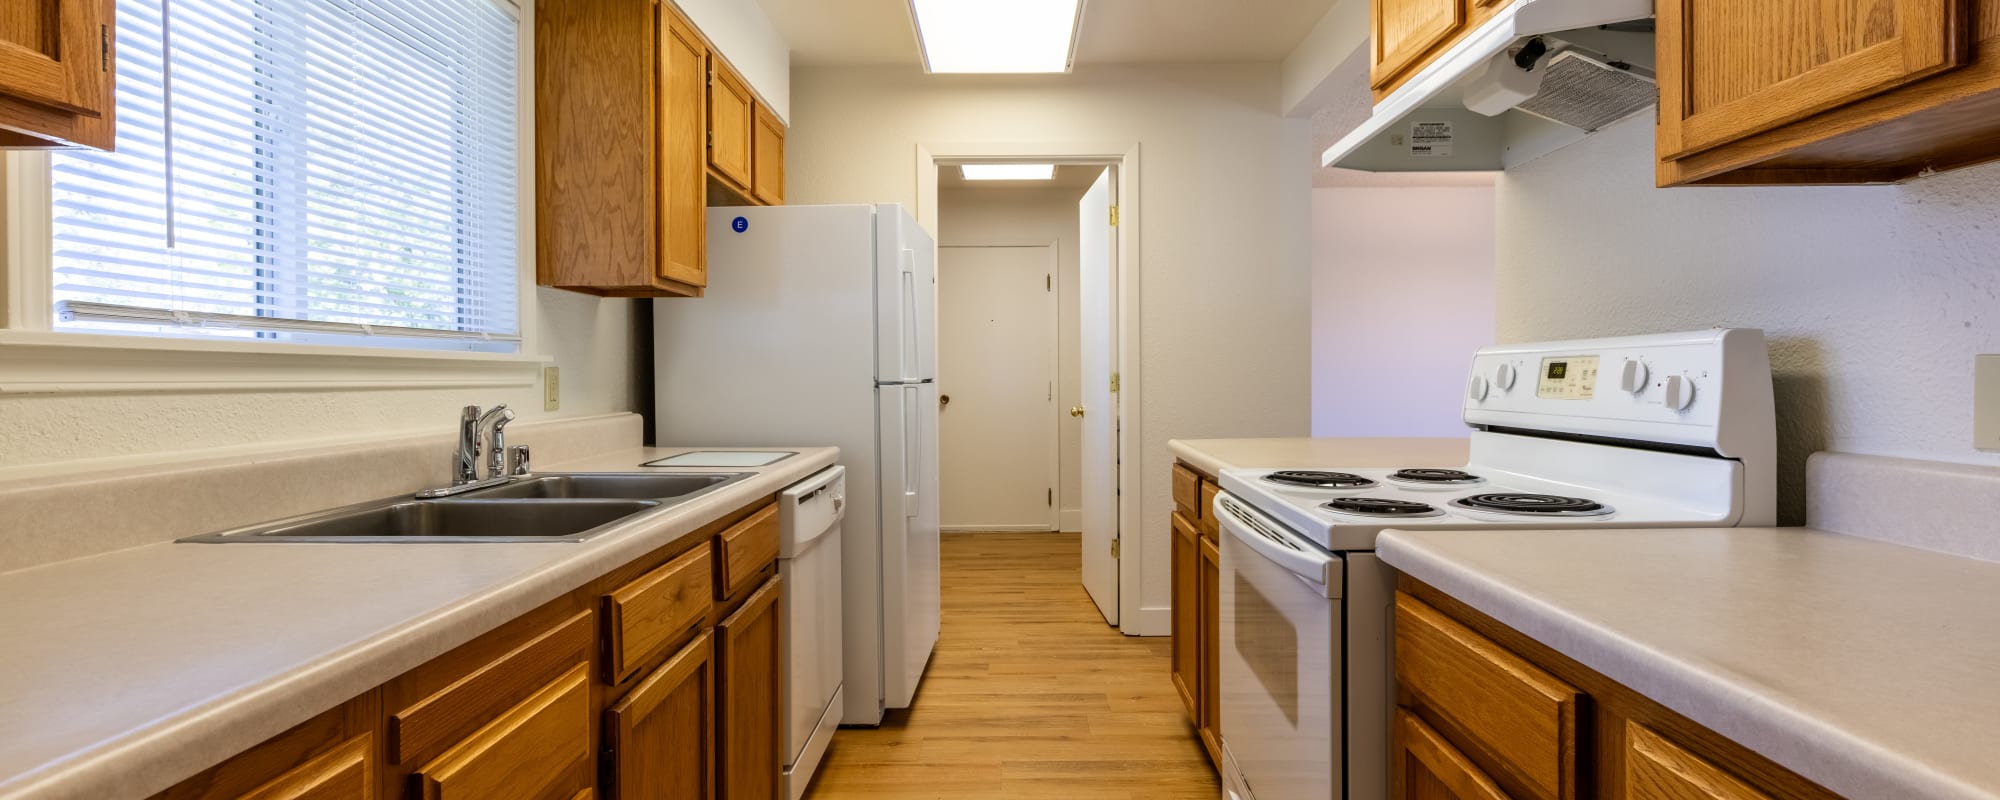 Gally Kitchen at New Hillside in Joint Base Lewis McChord, Washington